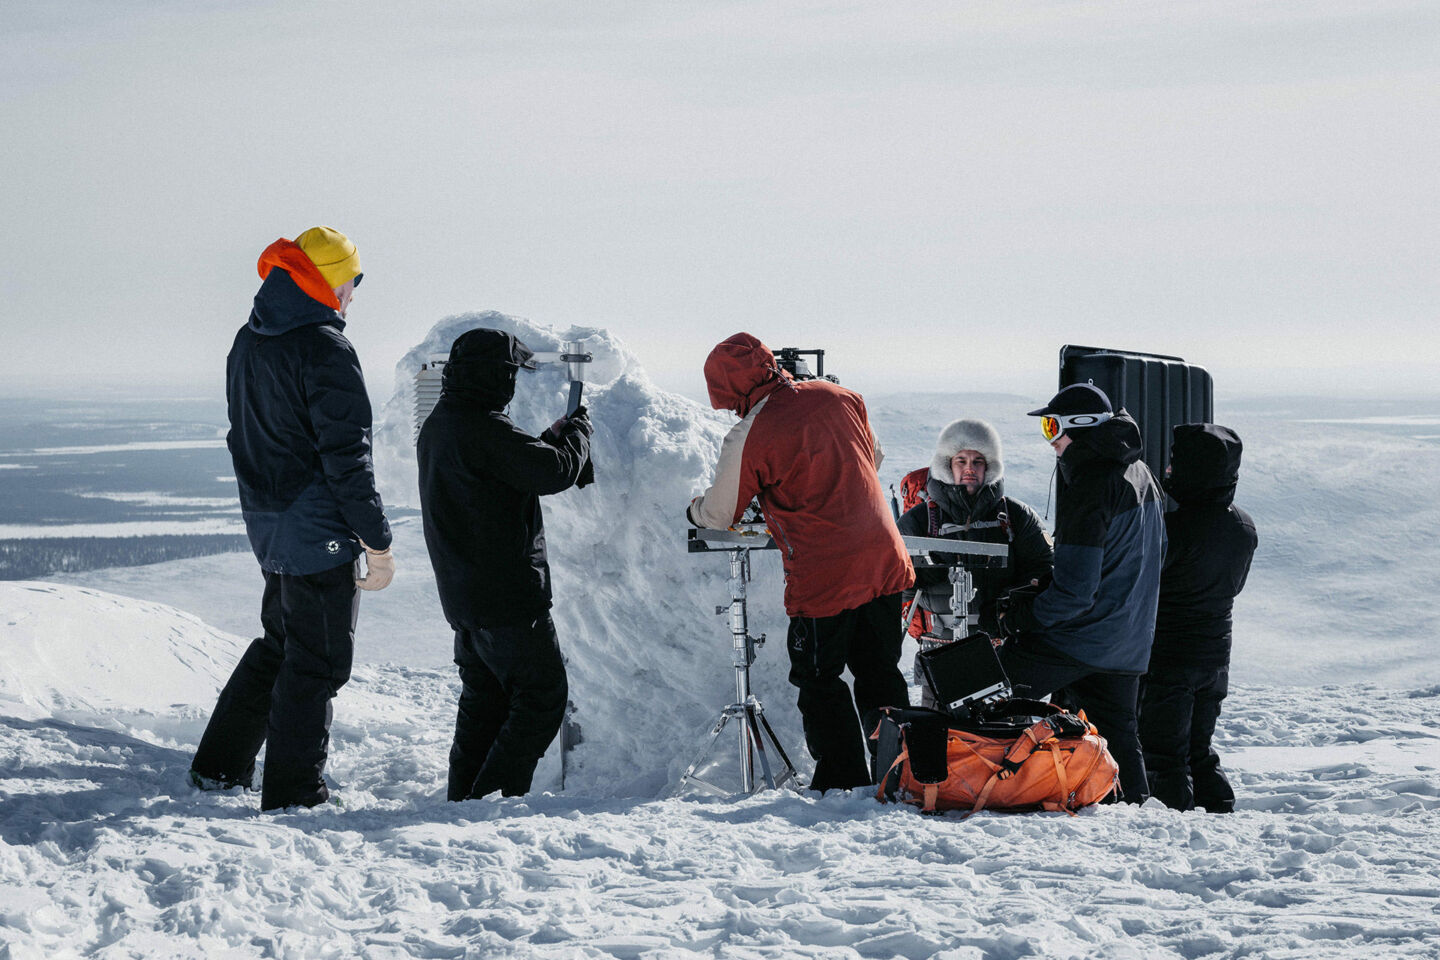 Filming on a snowy day in Finnish Lapland